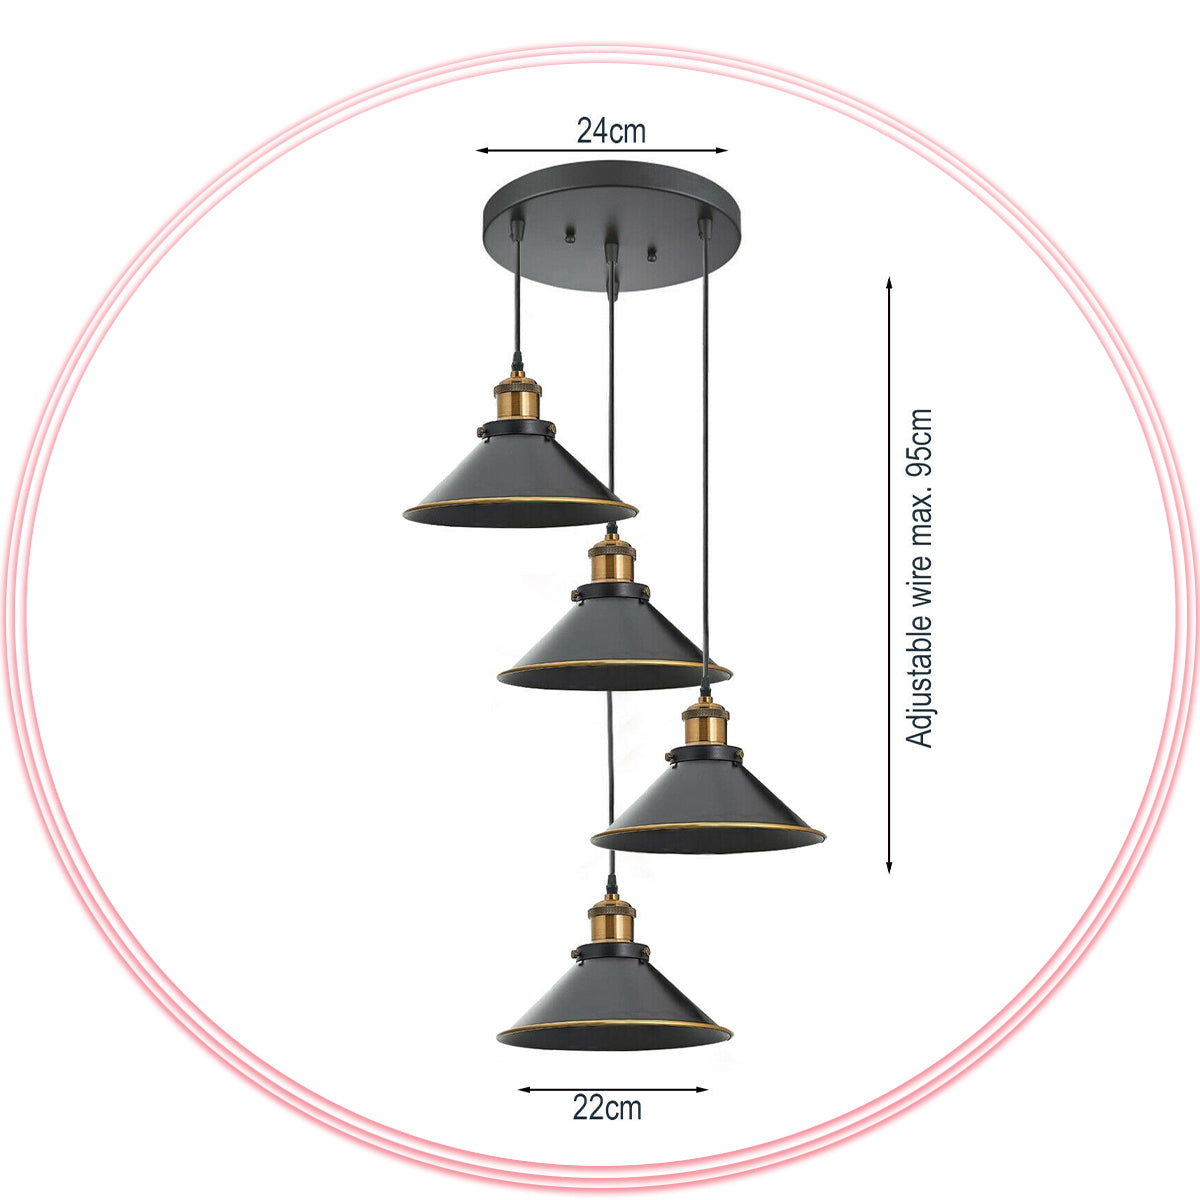 In the UK, 1-3-4 Head Lamp Options for a Ceiling Light Kit~2059